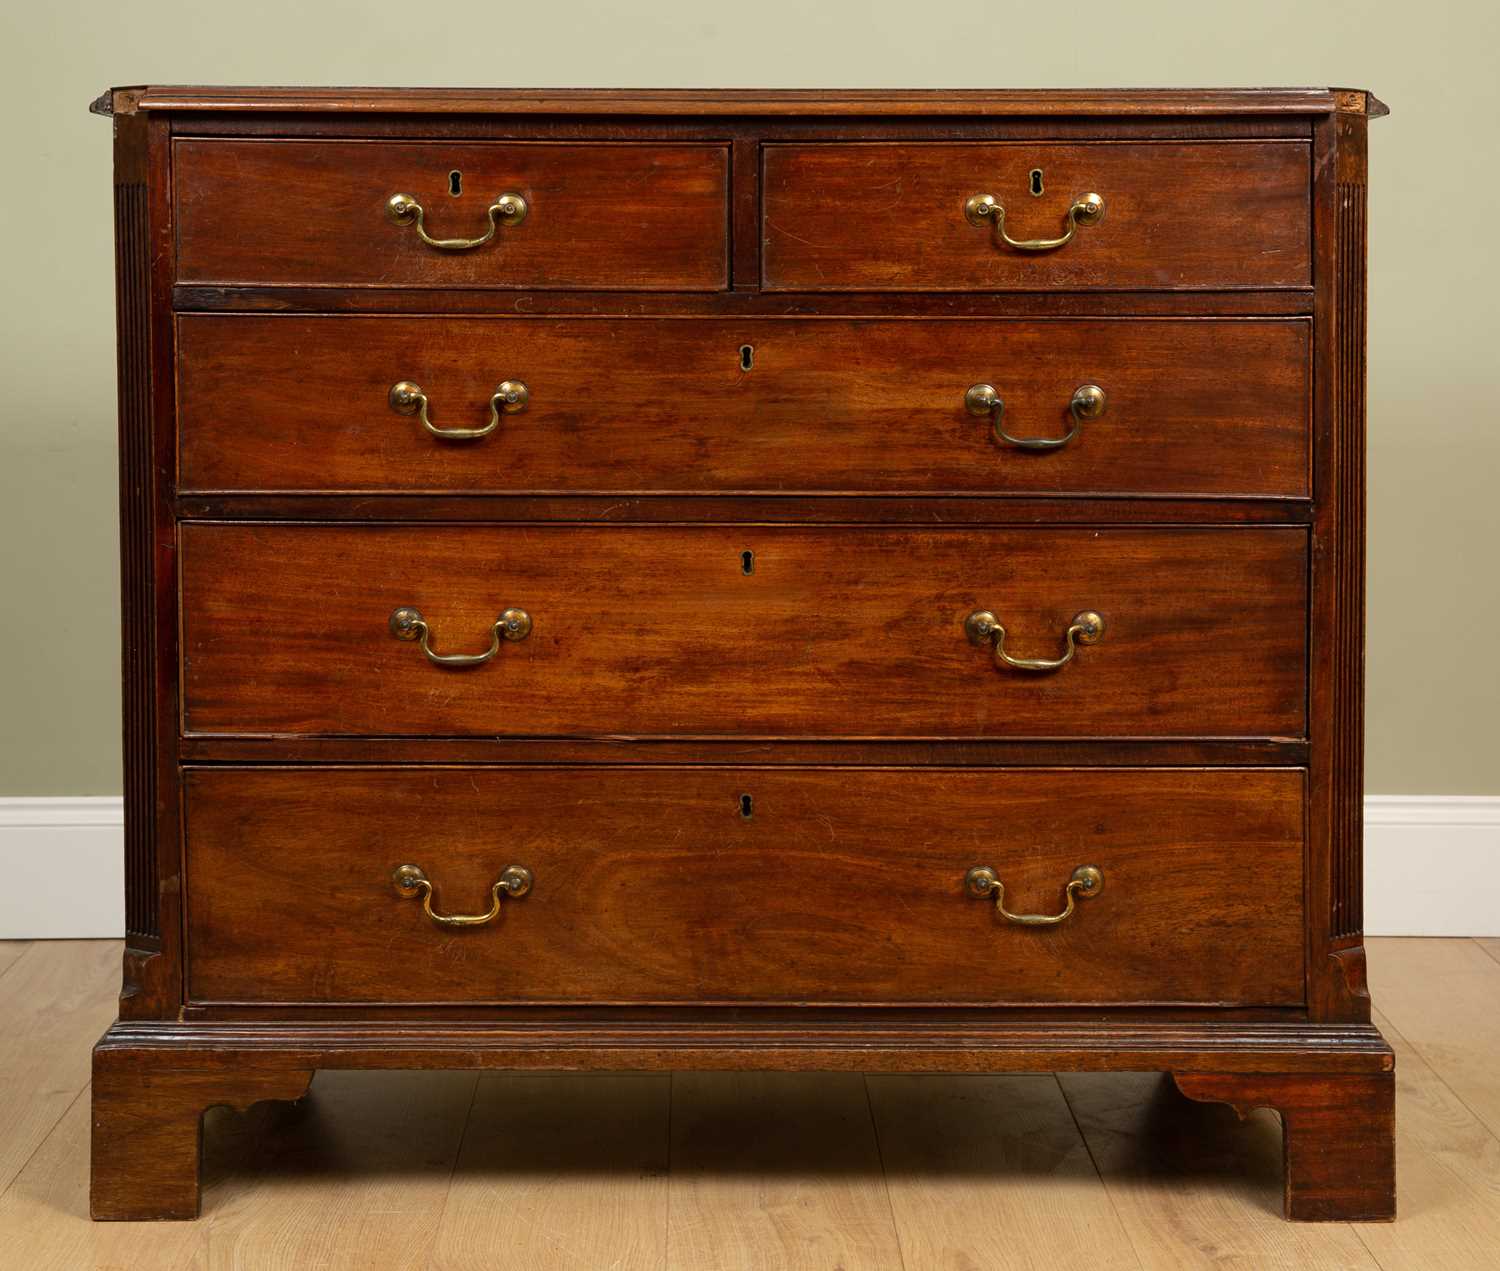 A George III mahogany chest of two short and three long drawers with brass swan neck handles and